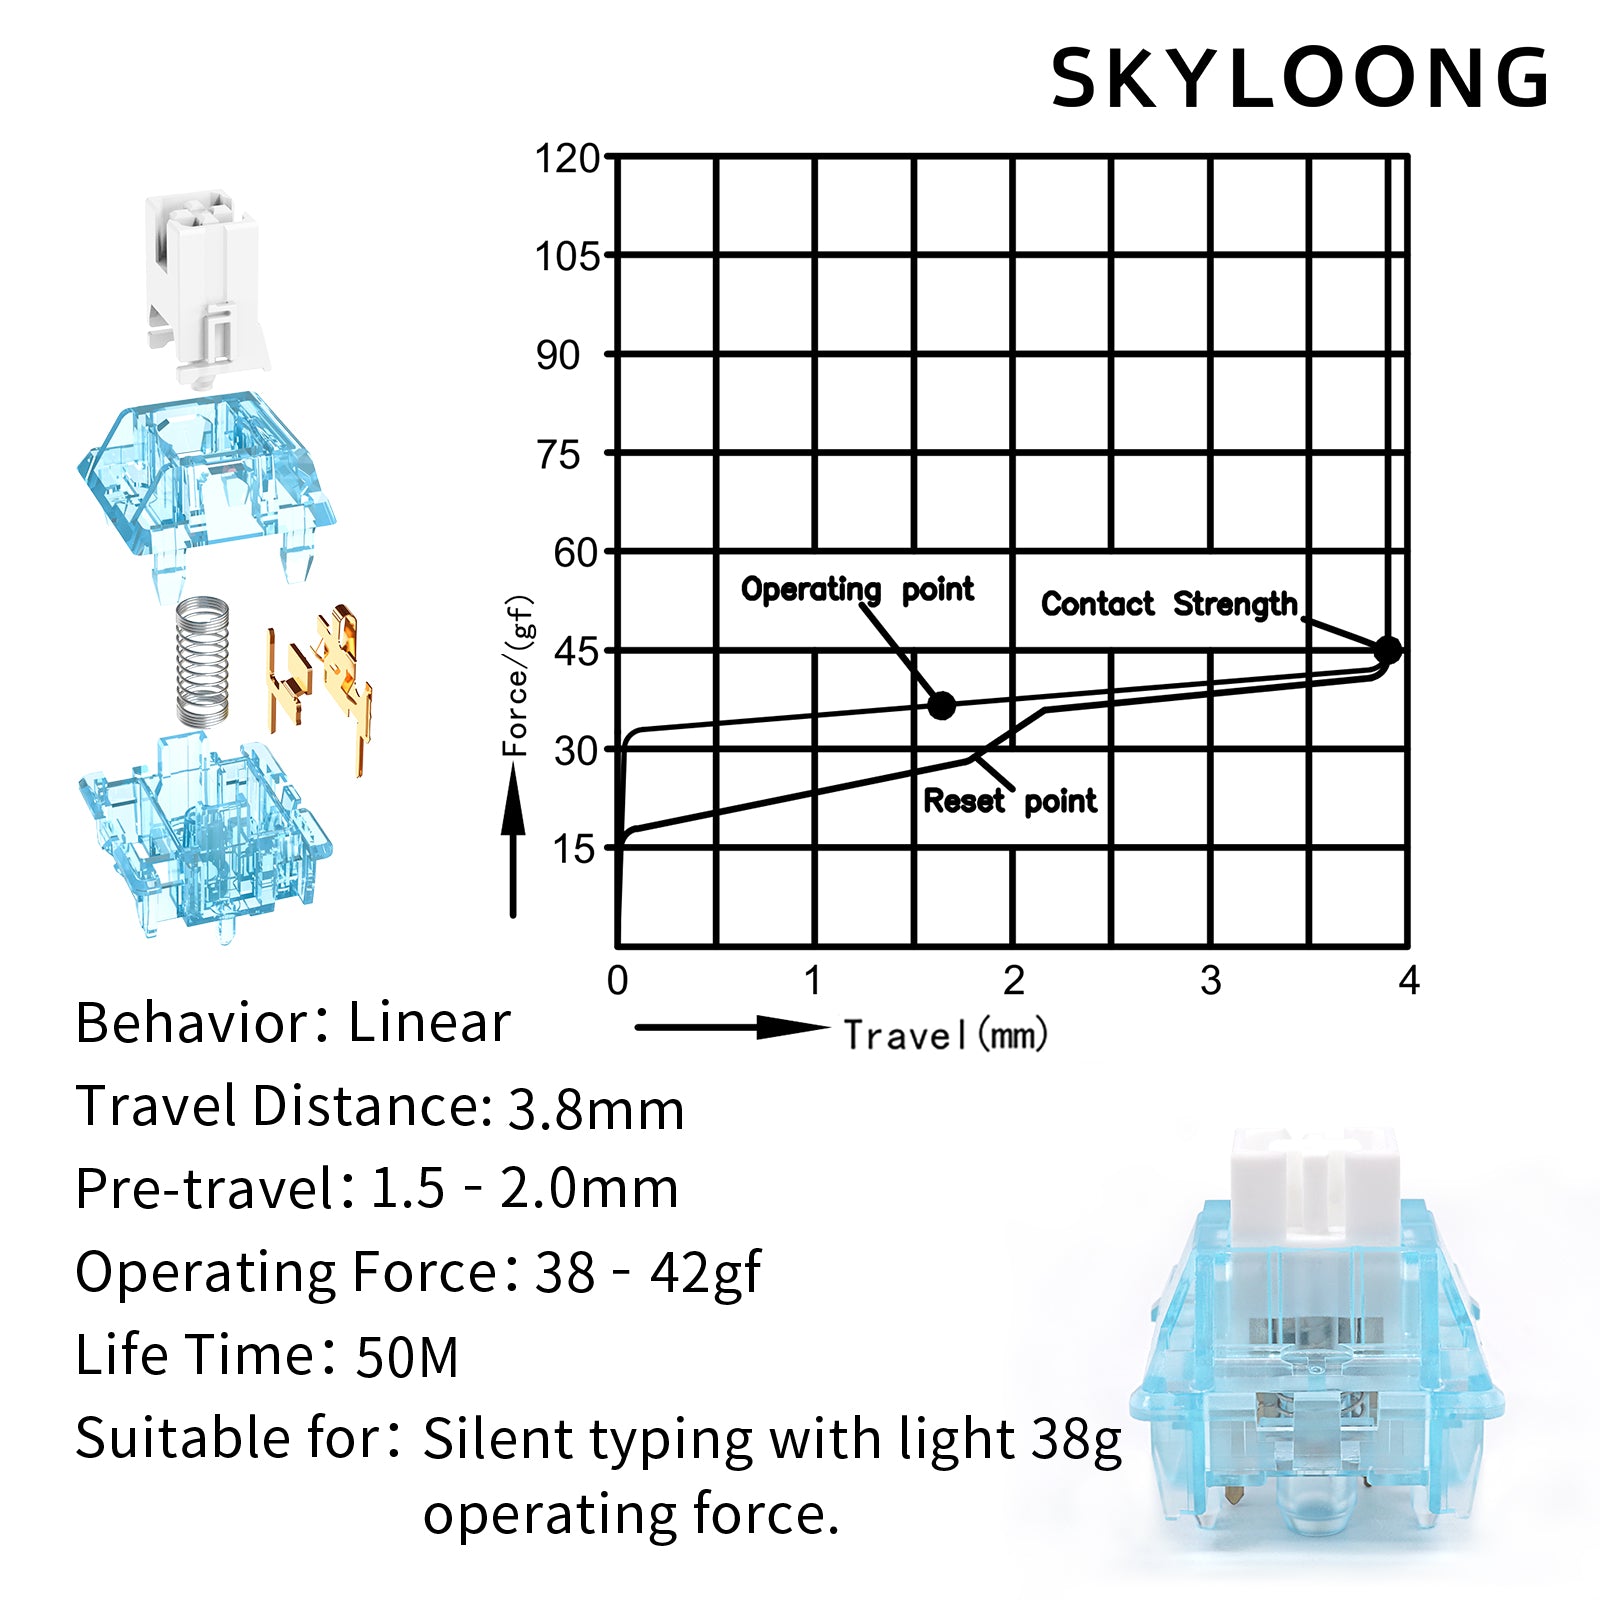 SKYLOONG Glacier Silent Switches 96pc